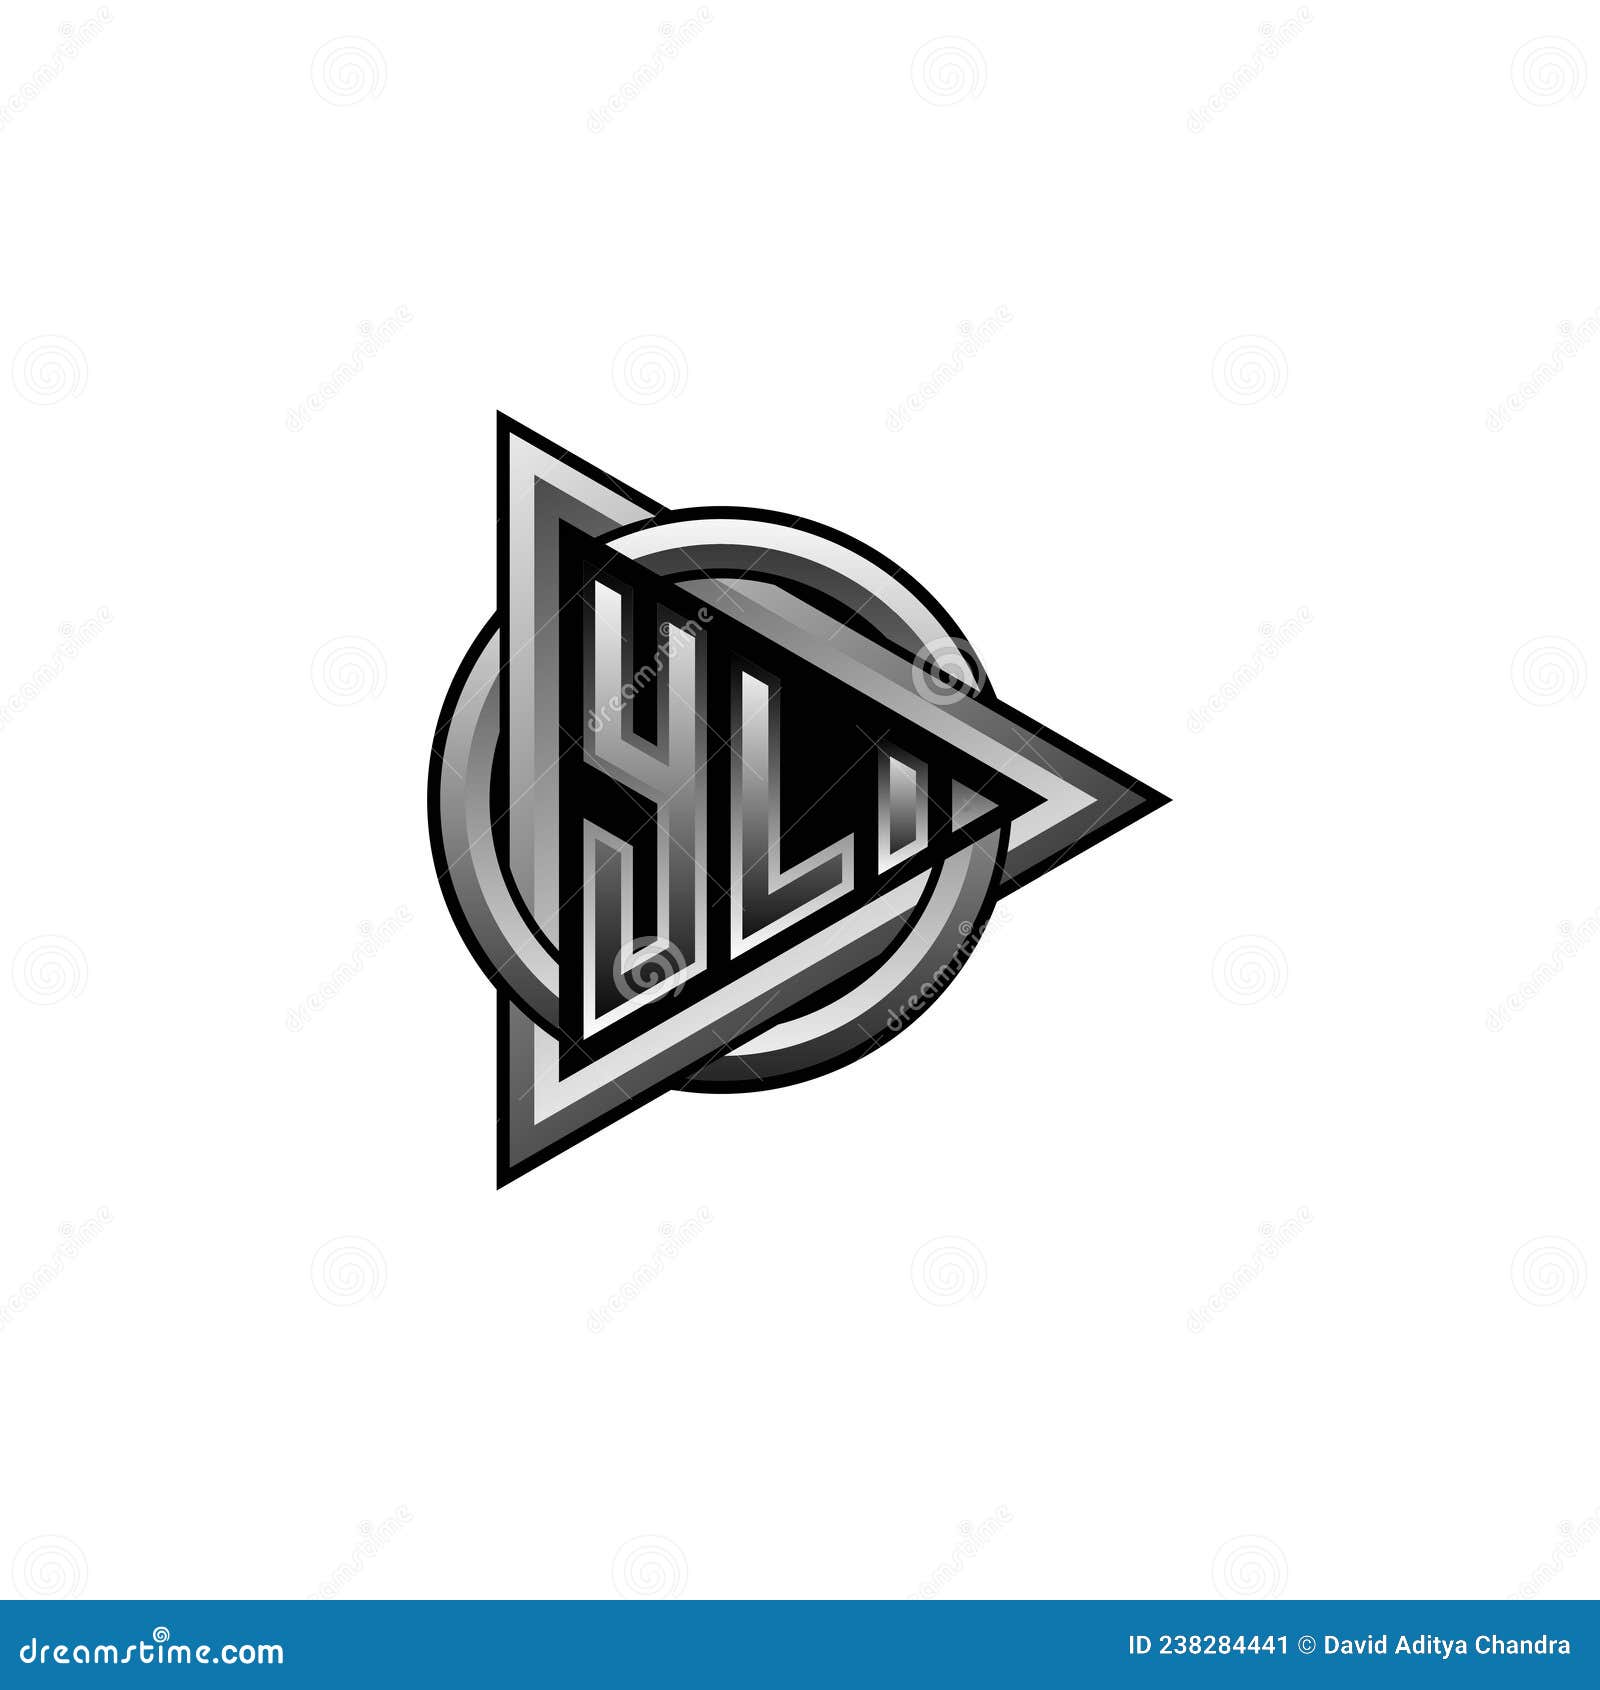 Initial Letter Yl Logo Template Design PNG Images, Abstract, Logo